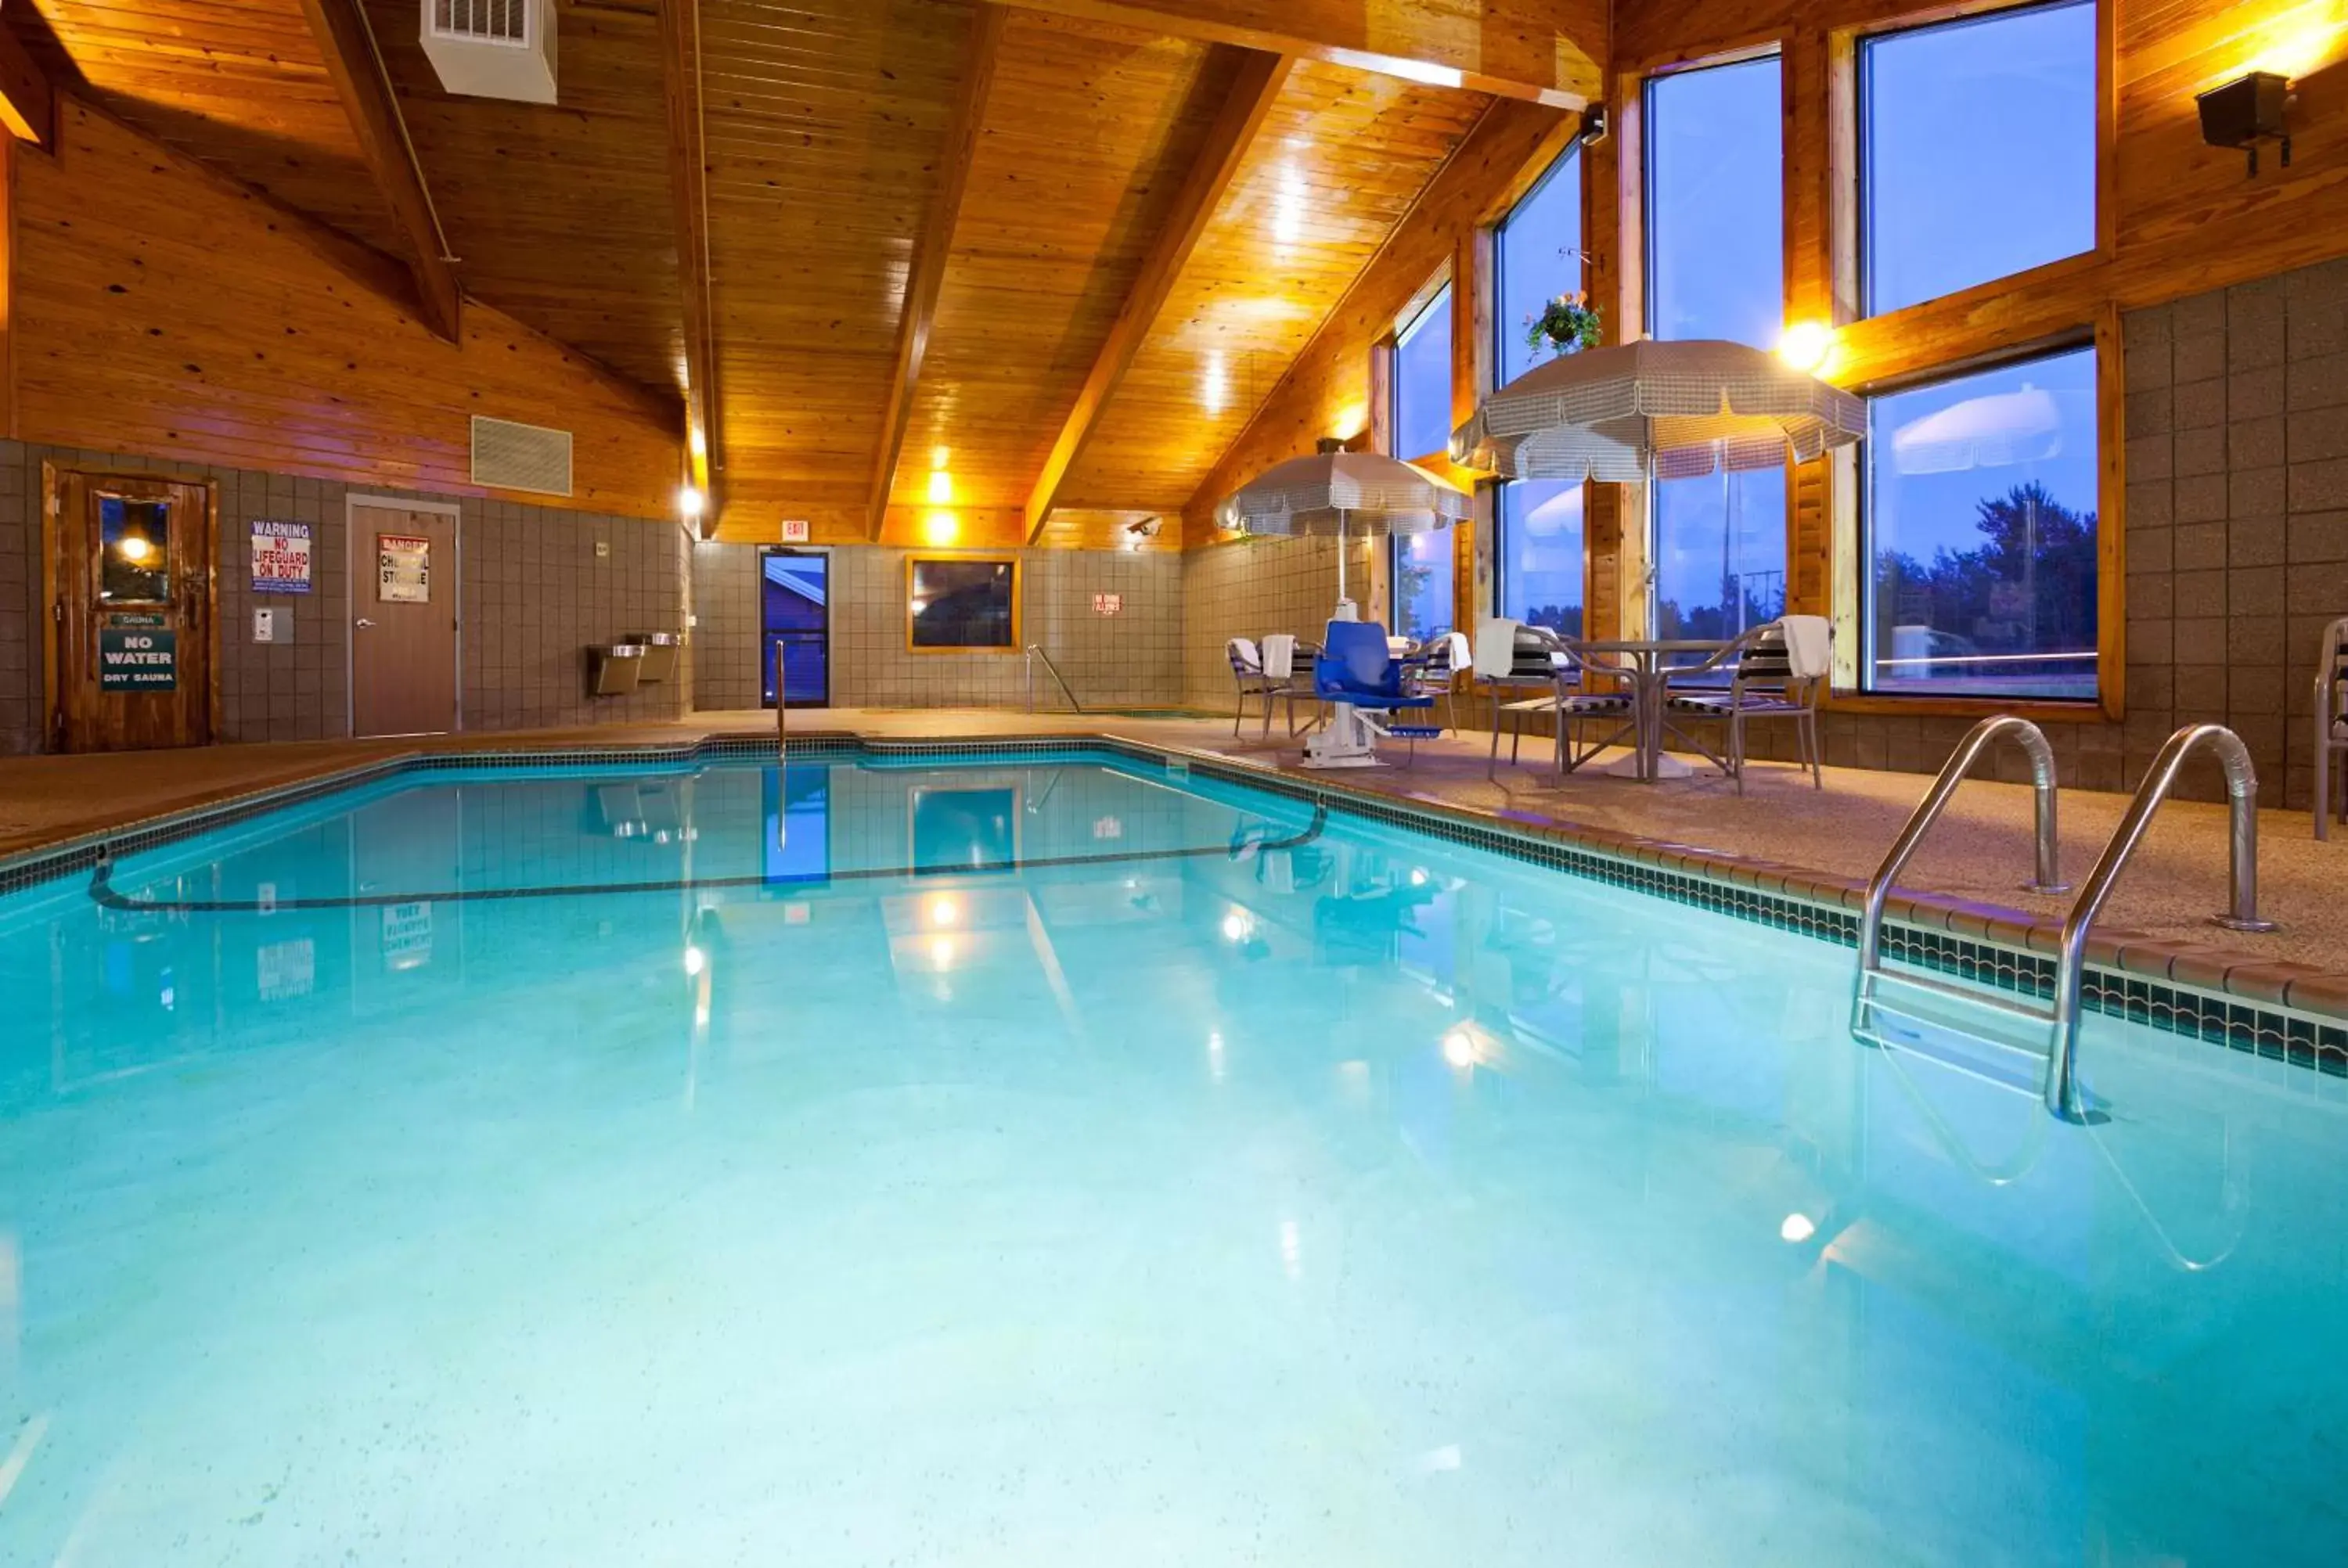 Swimming Pool in AmericInn by Wyndham Duluth South Proctor Black Woods Event Ctr